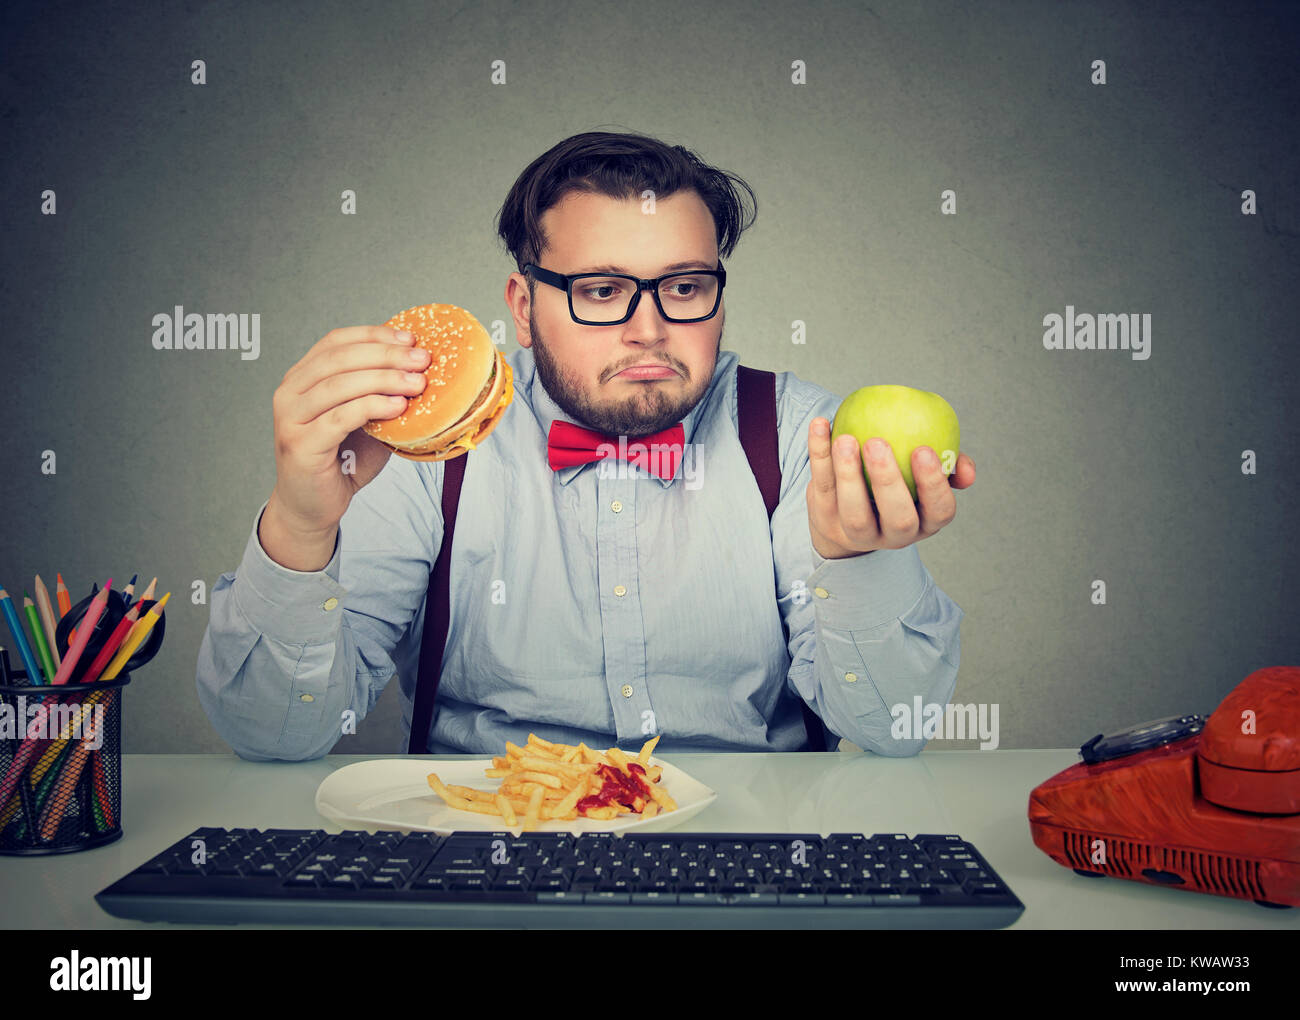 Chubby man looking confused and sad trying to choose between apple and burger while spending time in office. Stock Photo